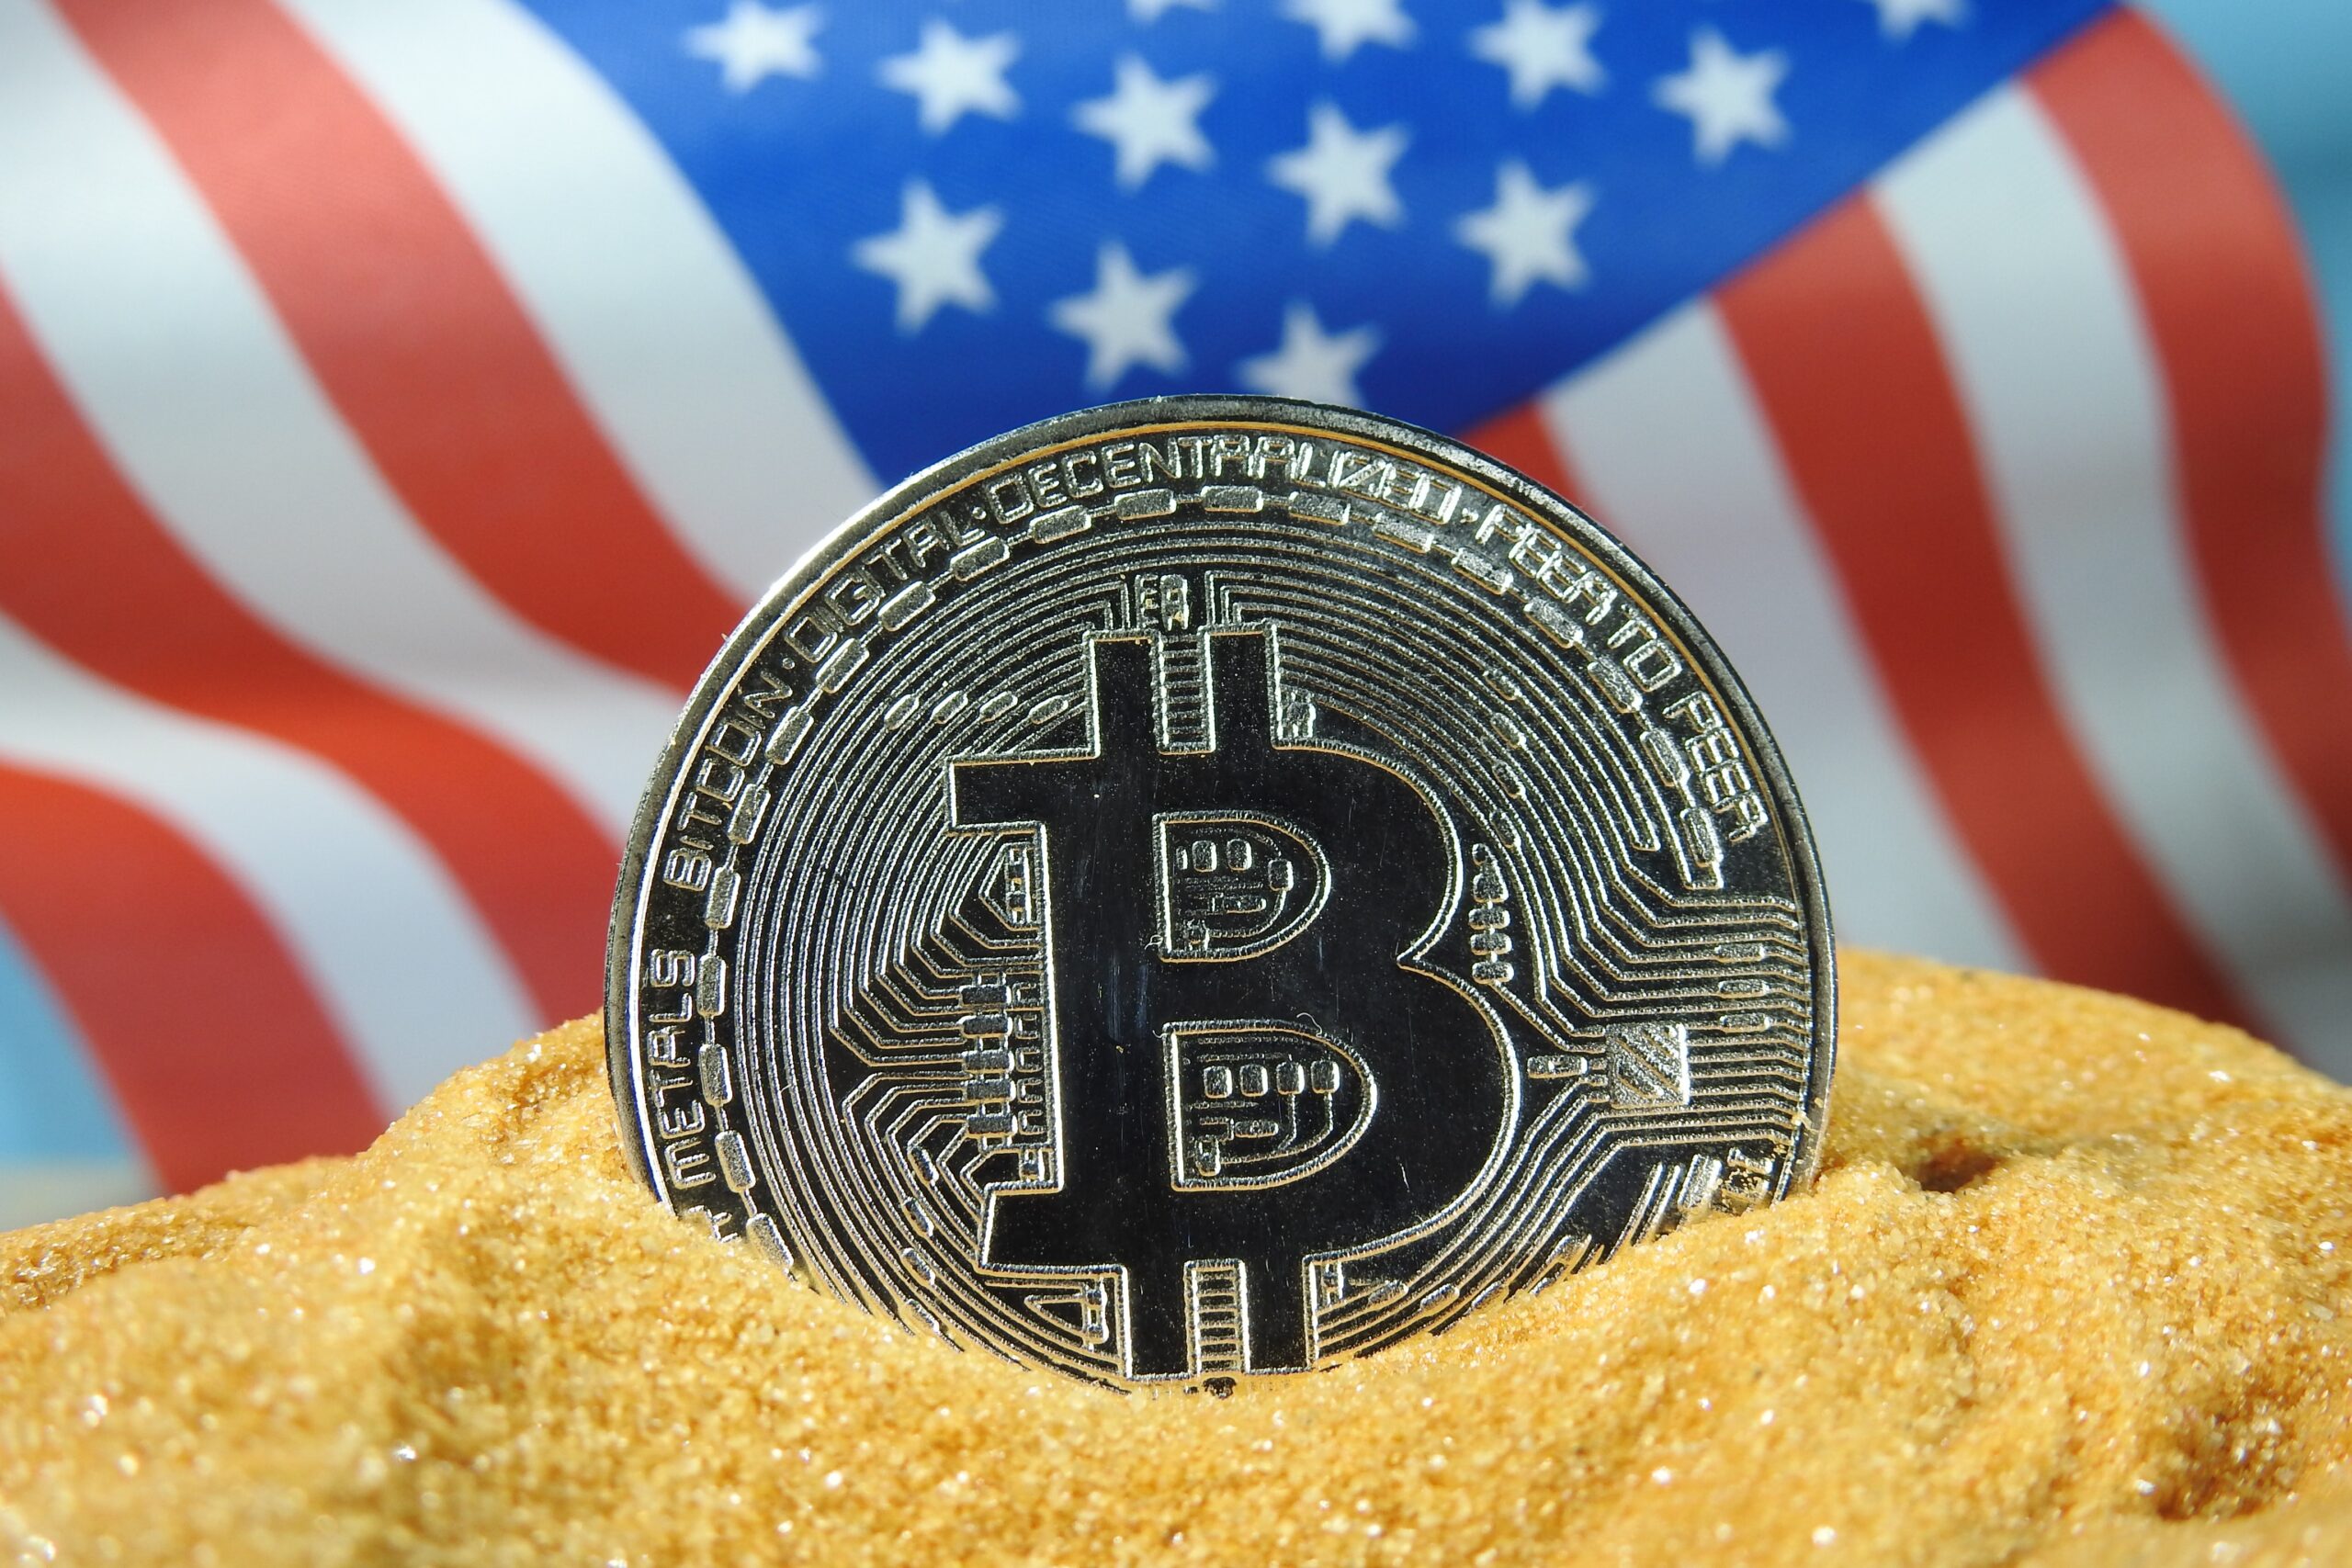 Bitcoin Price Tanks With Stocks, What Does Technical Analysis Show? - Visionary Financial